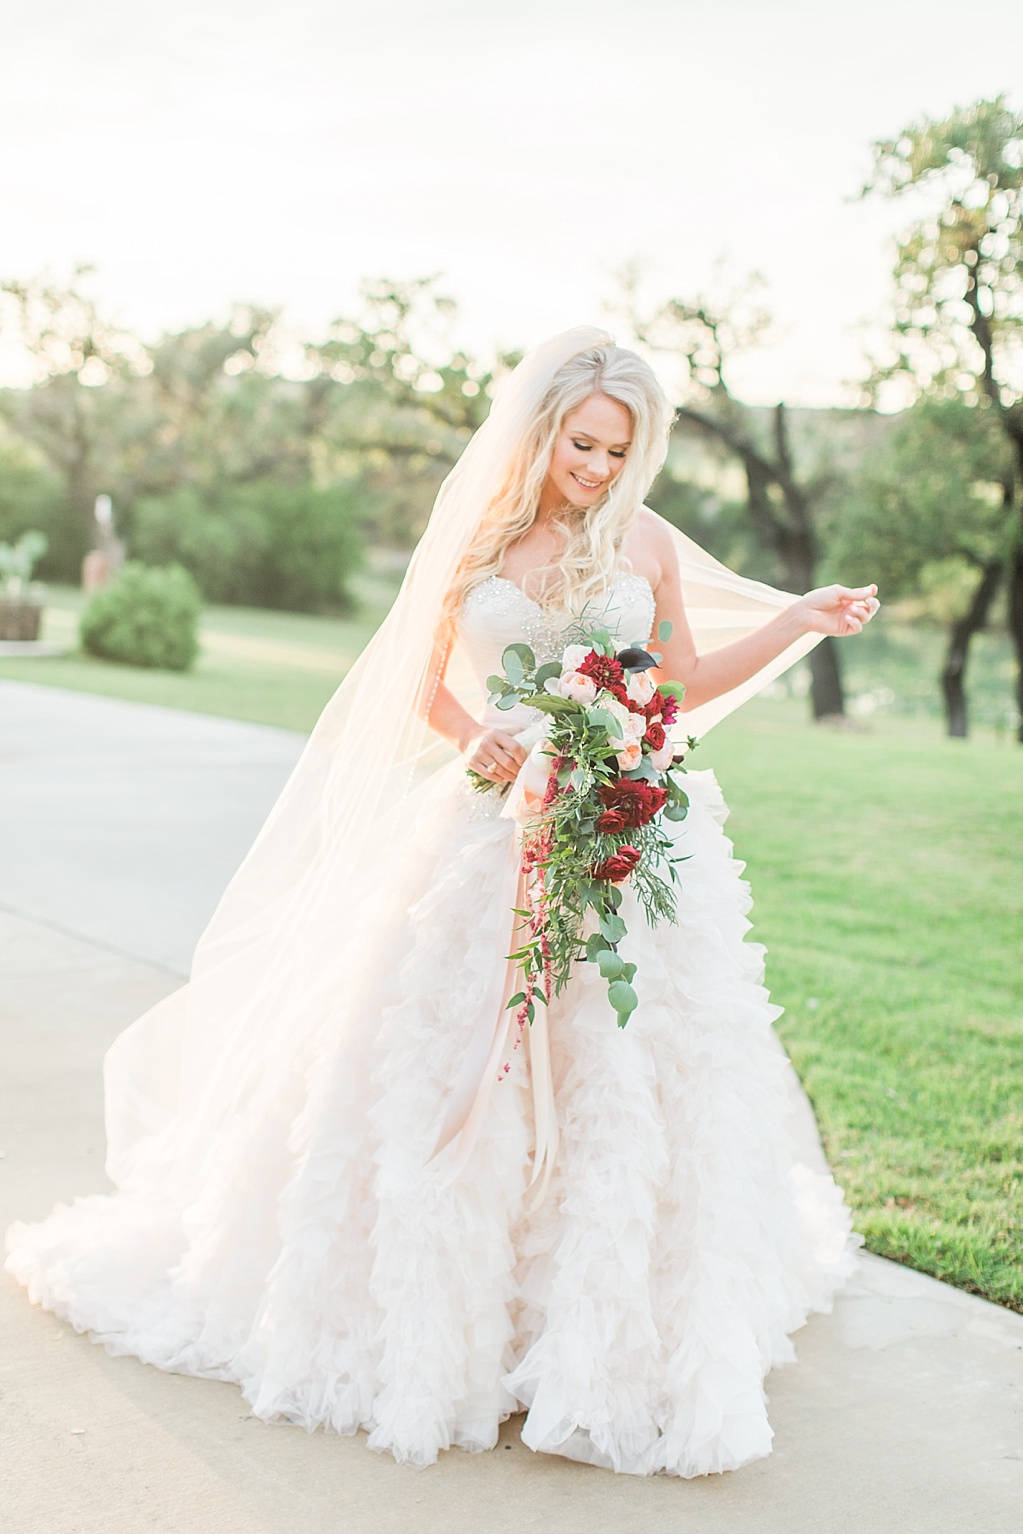 A Classic Bridal Session at Turtle Creek Olive Grove Wedding Venue in Kerrville, Texas 0016